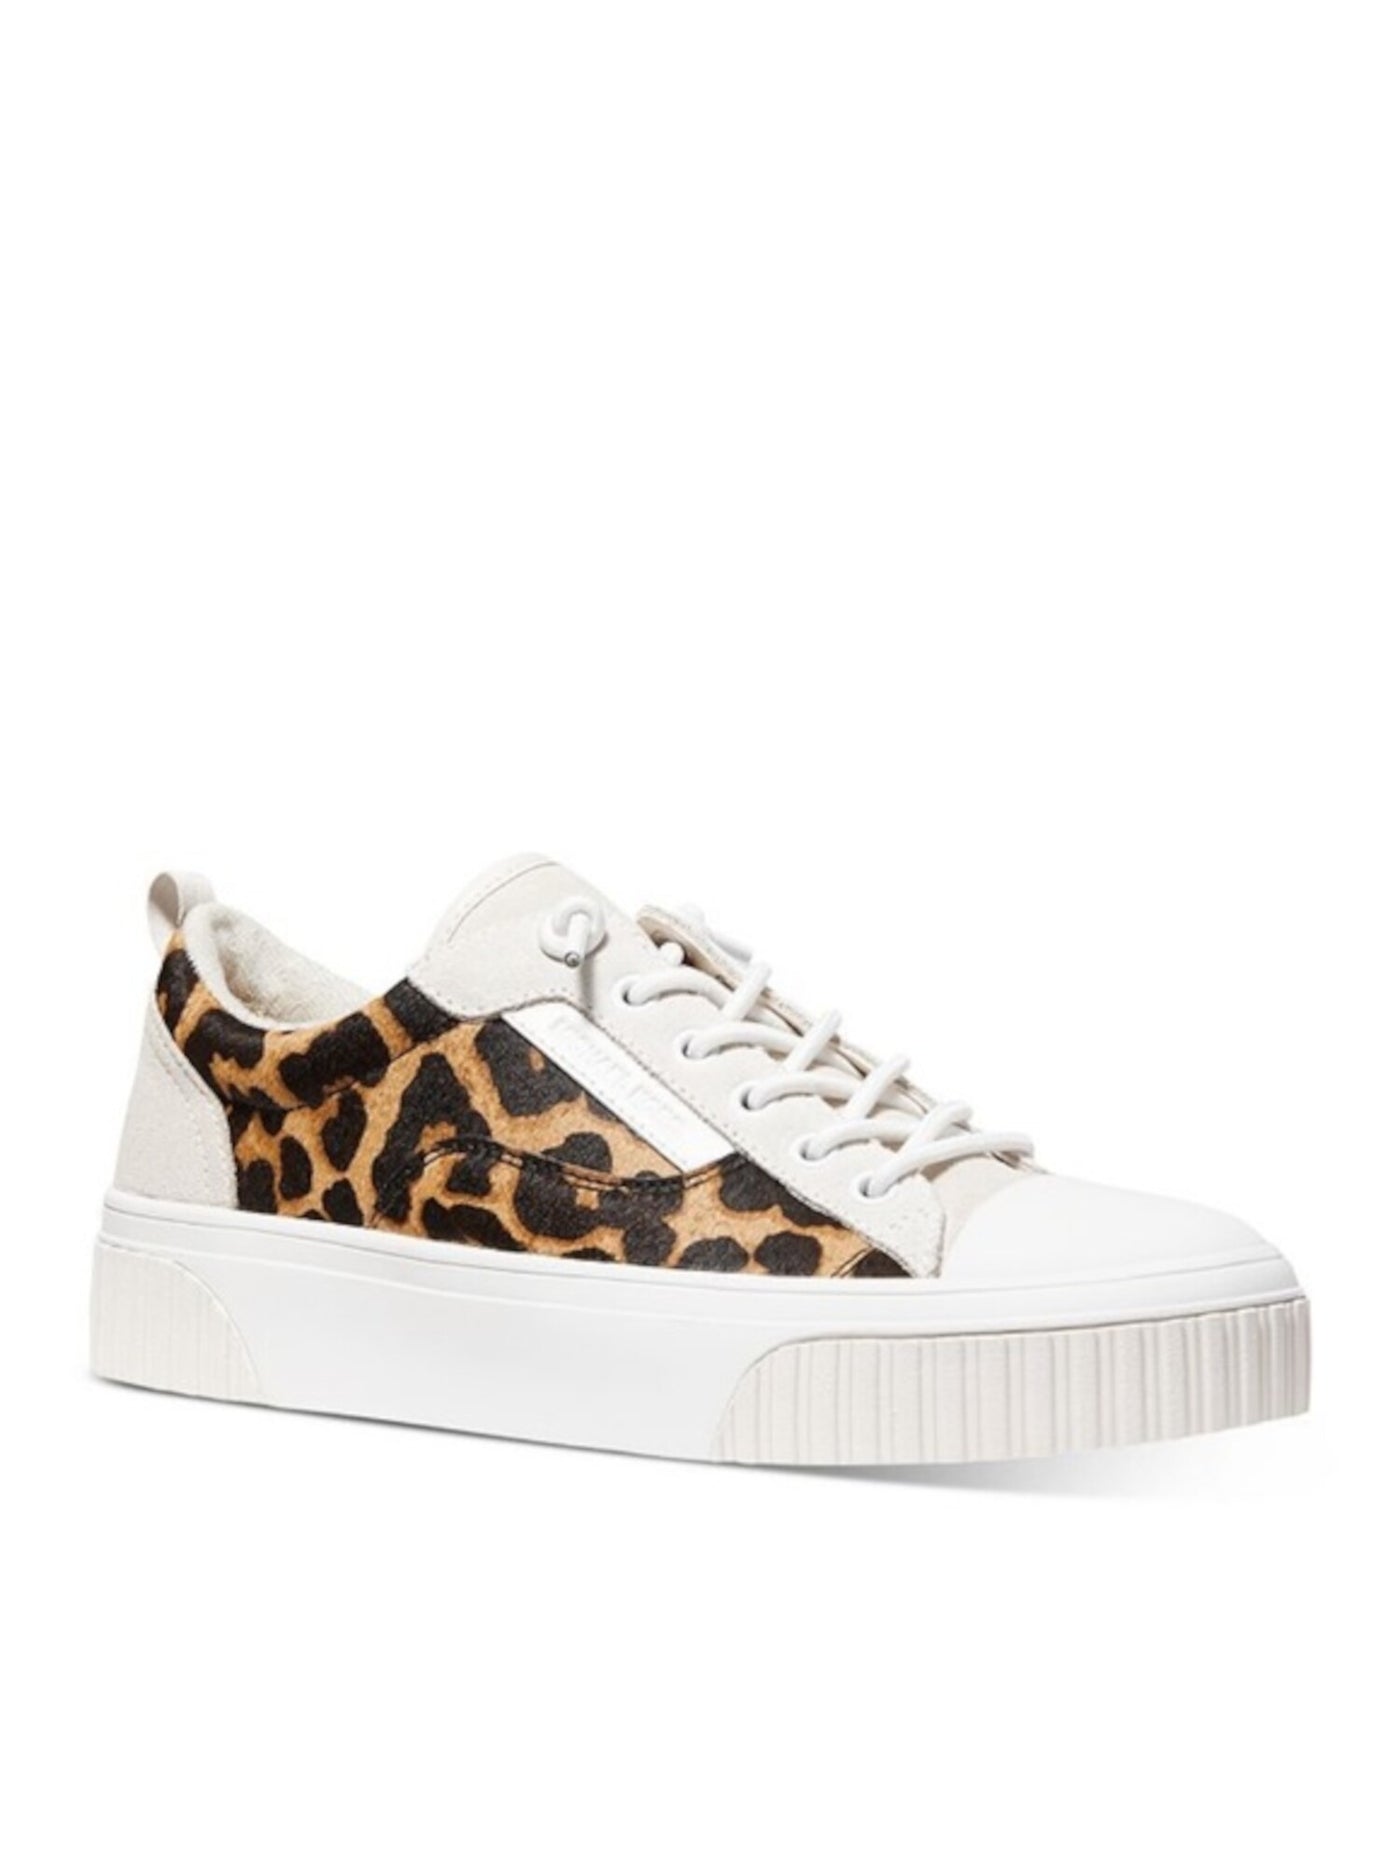 MICHAEL MICHAEL KORS Womens White Leopard Print Removable Insole Pull Tab Logo Oscar Round Toe Platform Lace-Up Leather Athletic Sneakers 8.5 M